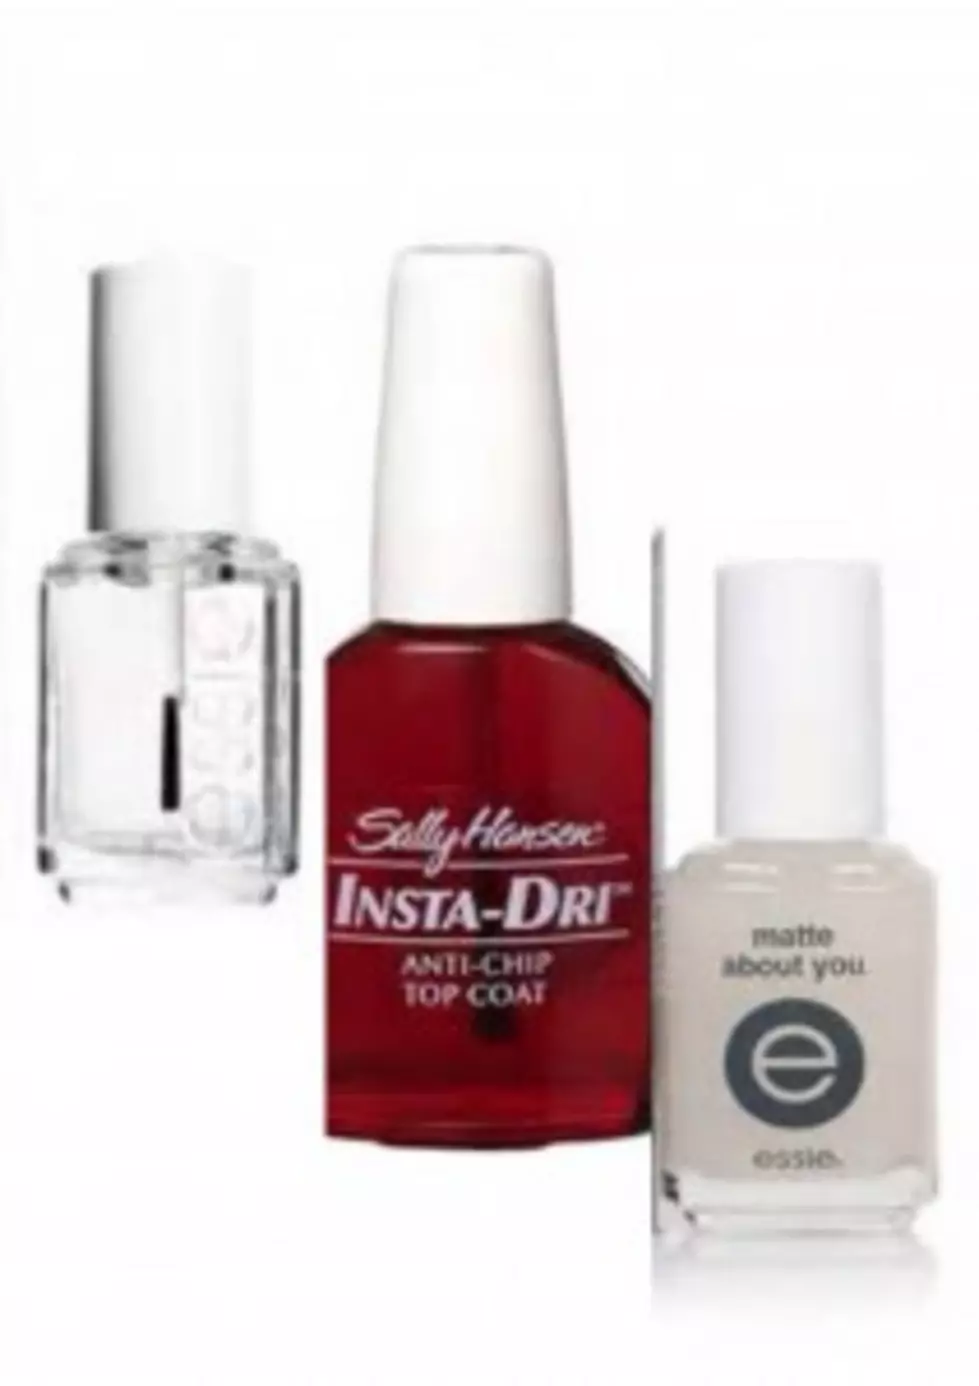 What Are The Best Top Coats For Your Nails?